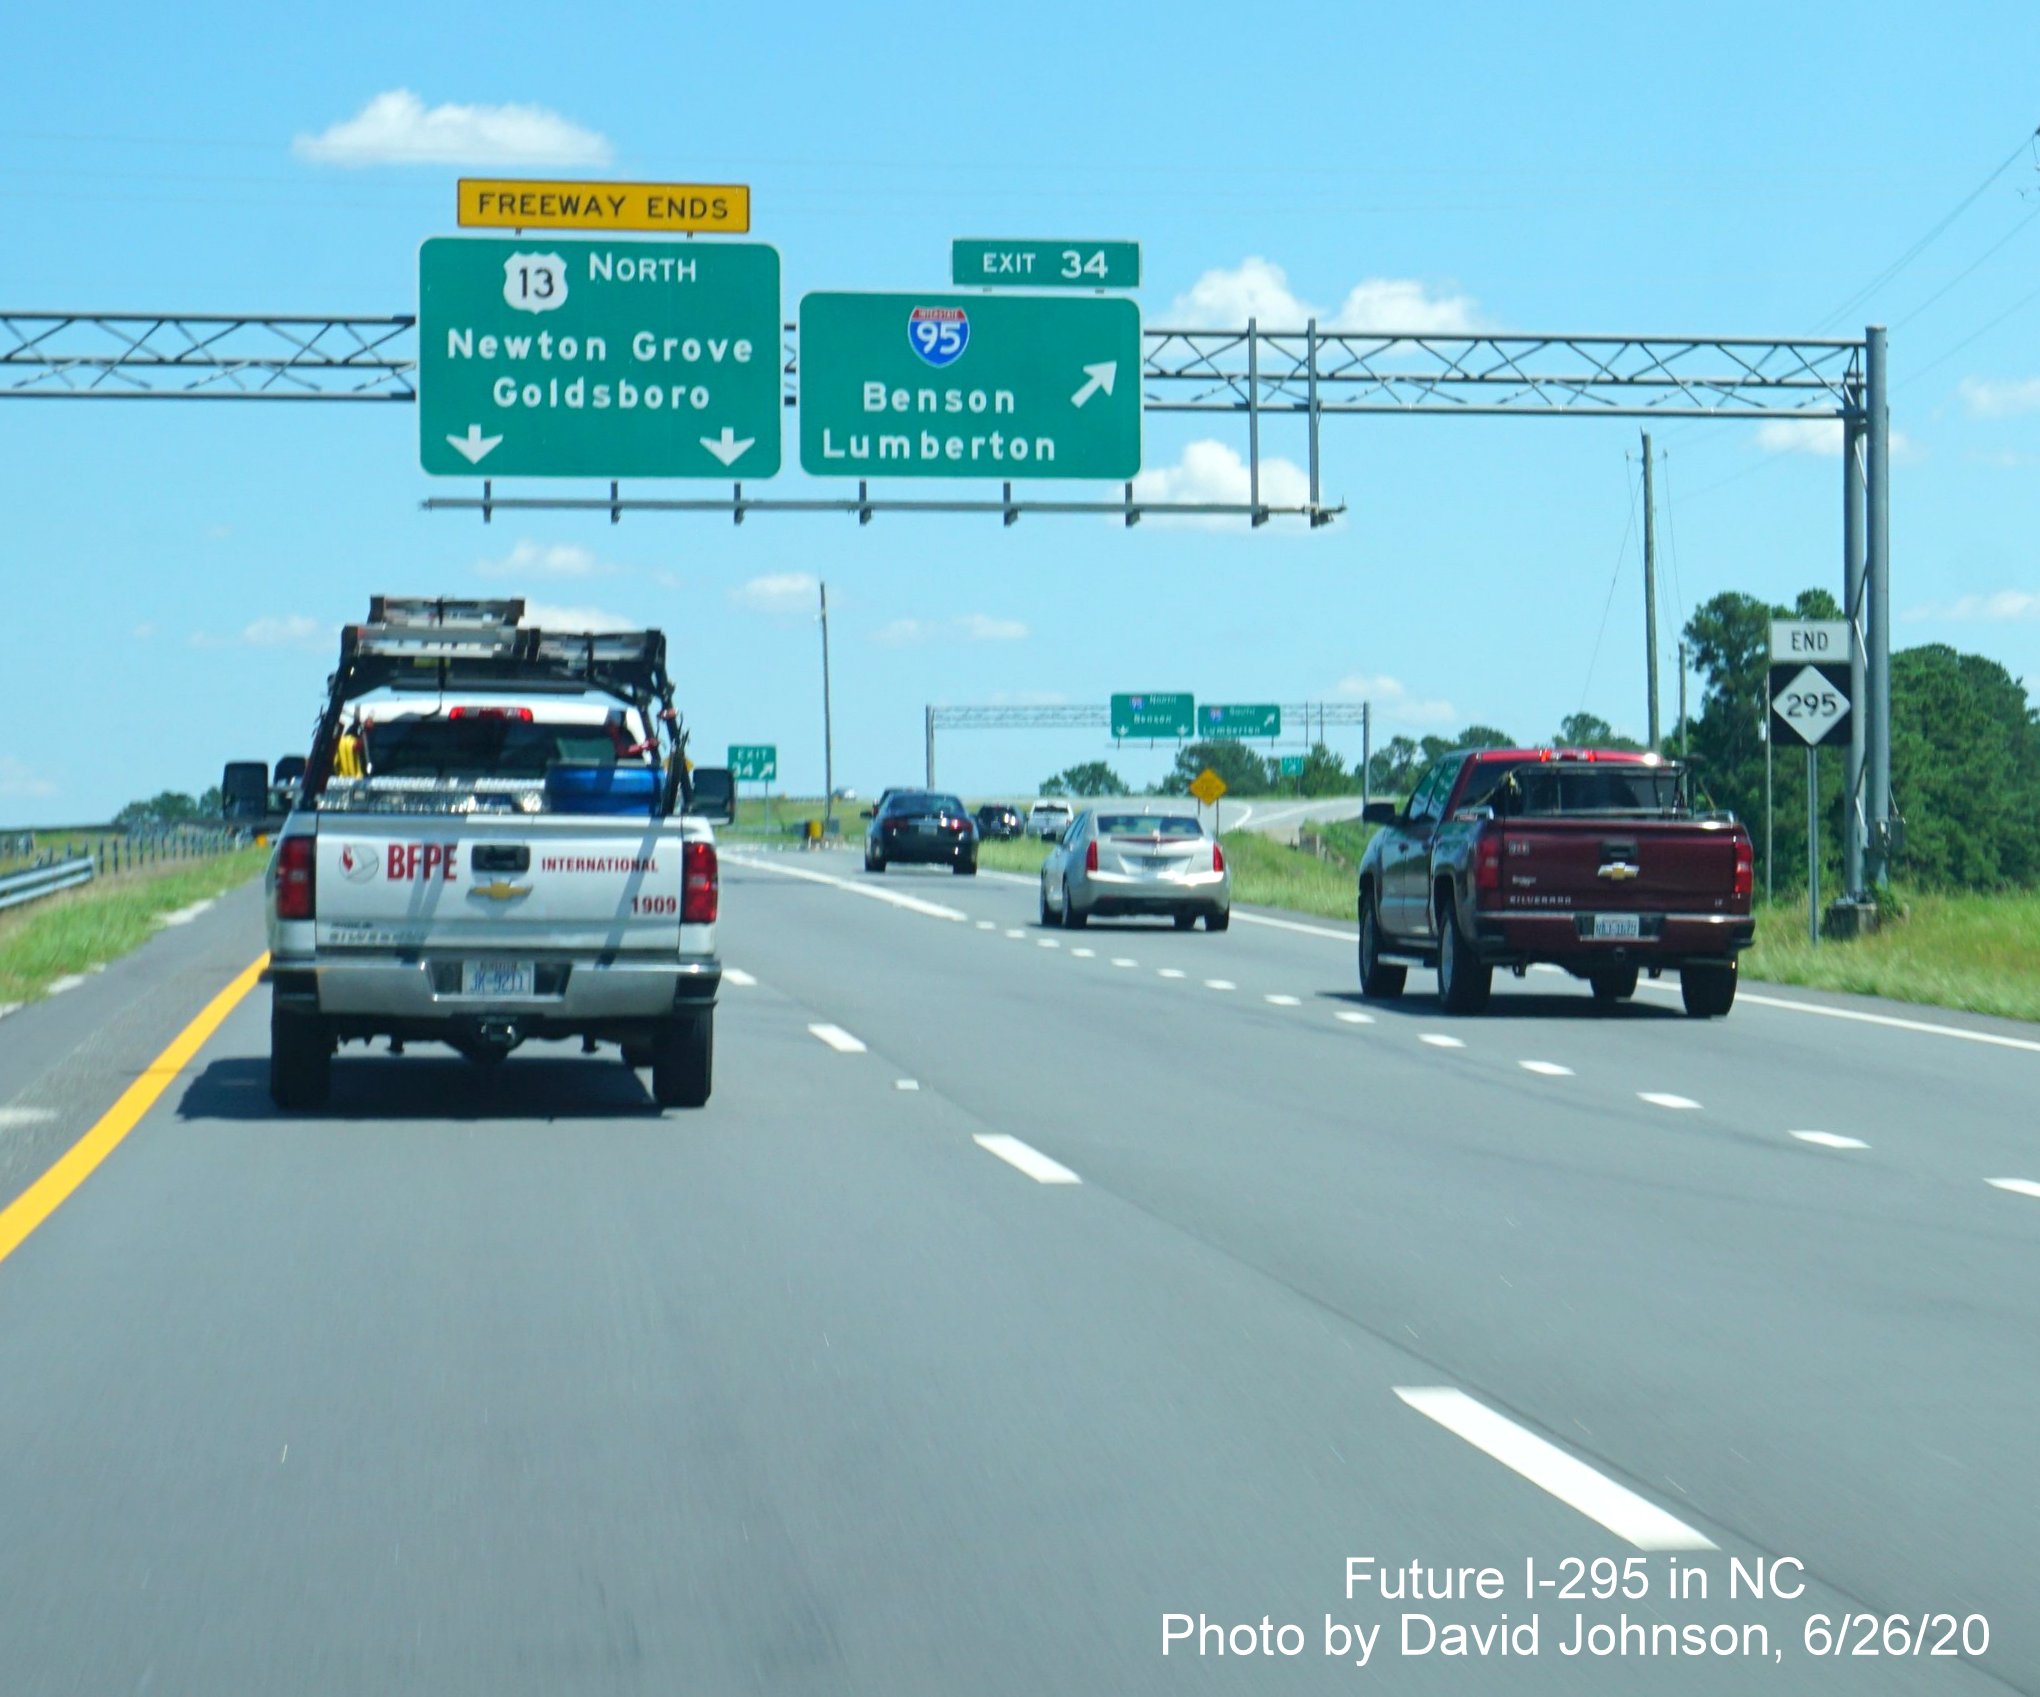 Image of overhead signage at I-95 exit ramp on I-295 North, including end NC 295 trailblazer, by David Johnson June 2020